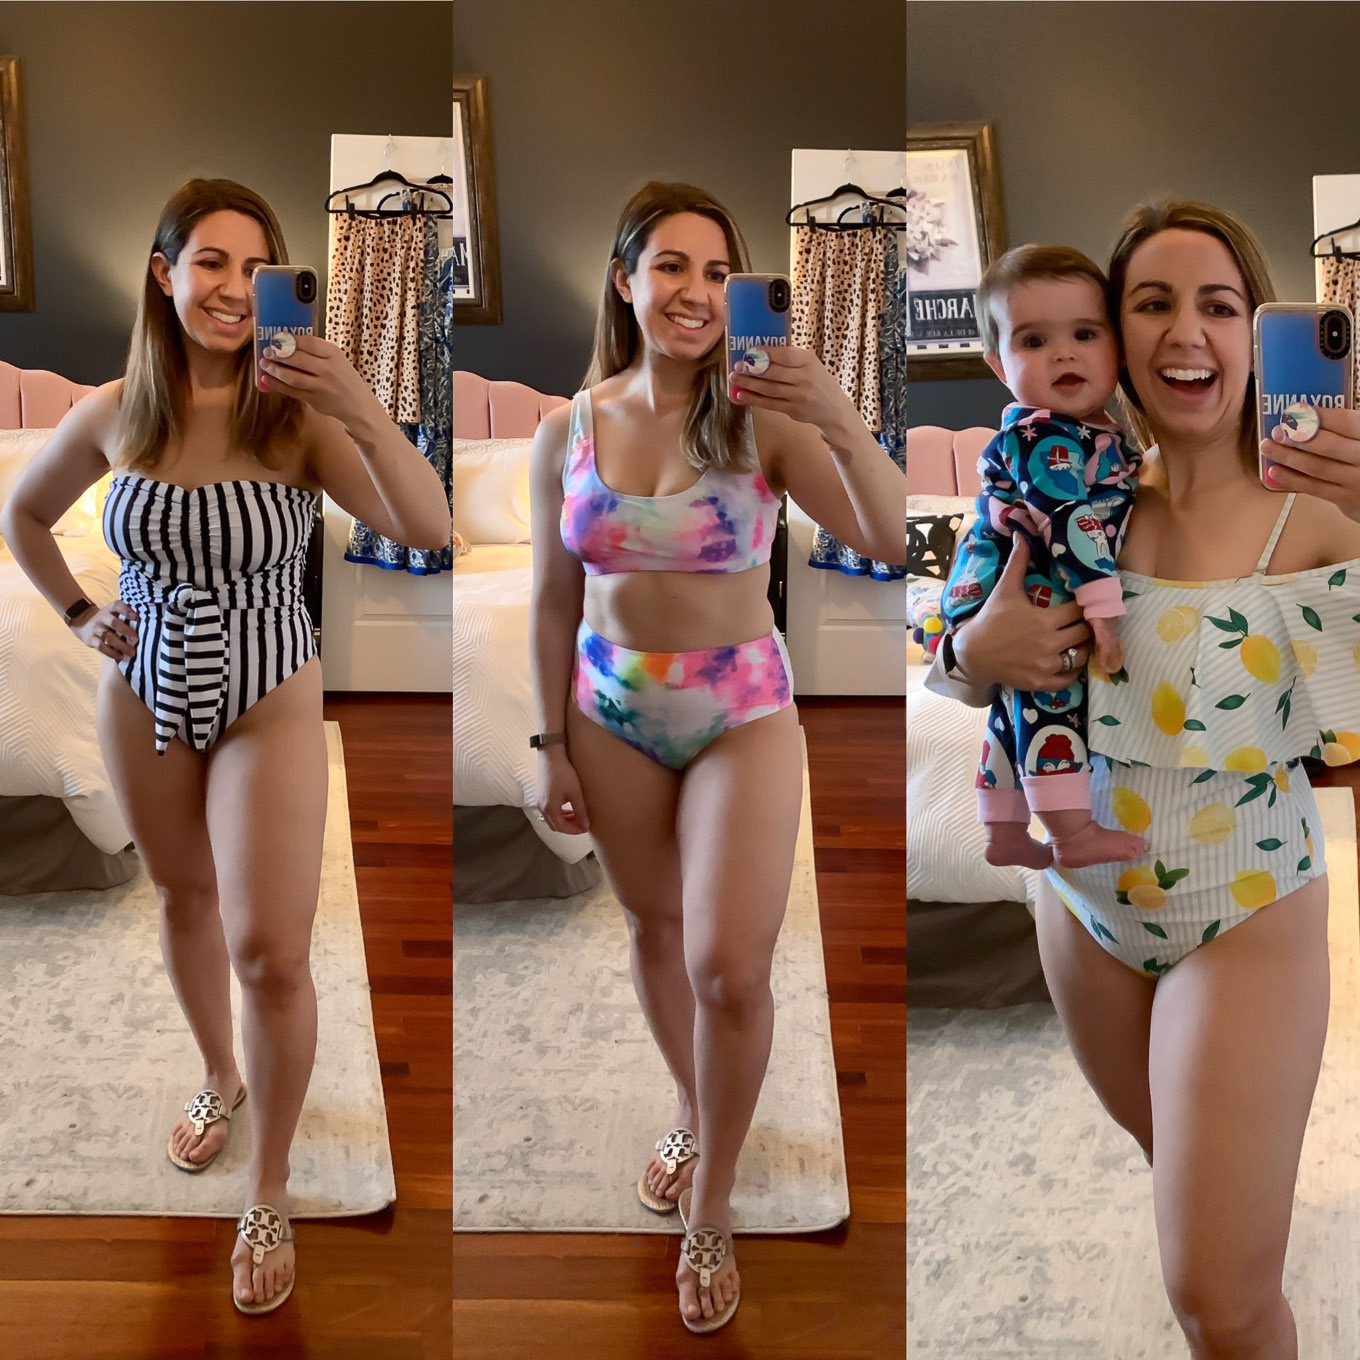 At Home Swimwear Try On by popular Chicago fashion blog, Glass of Glam: collage image of a woman wearing three different swimsuits.